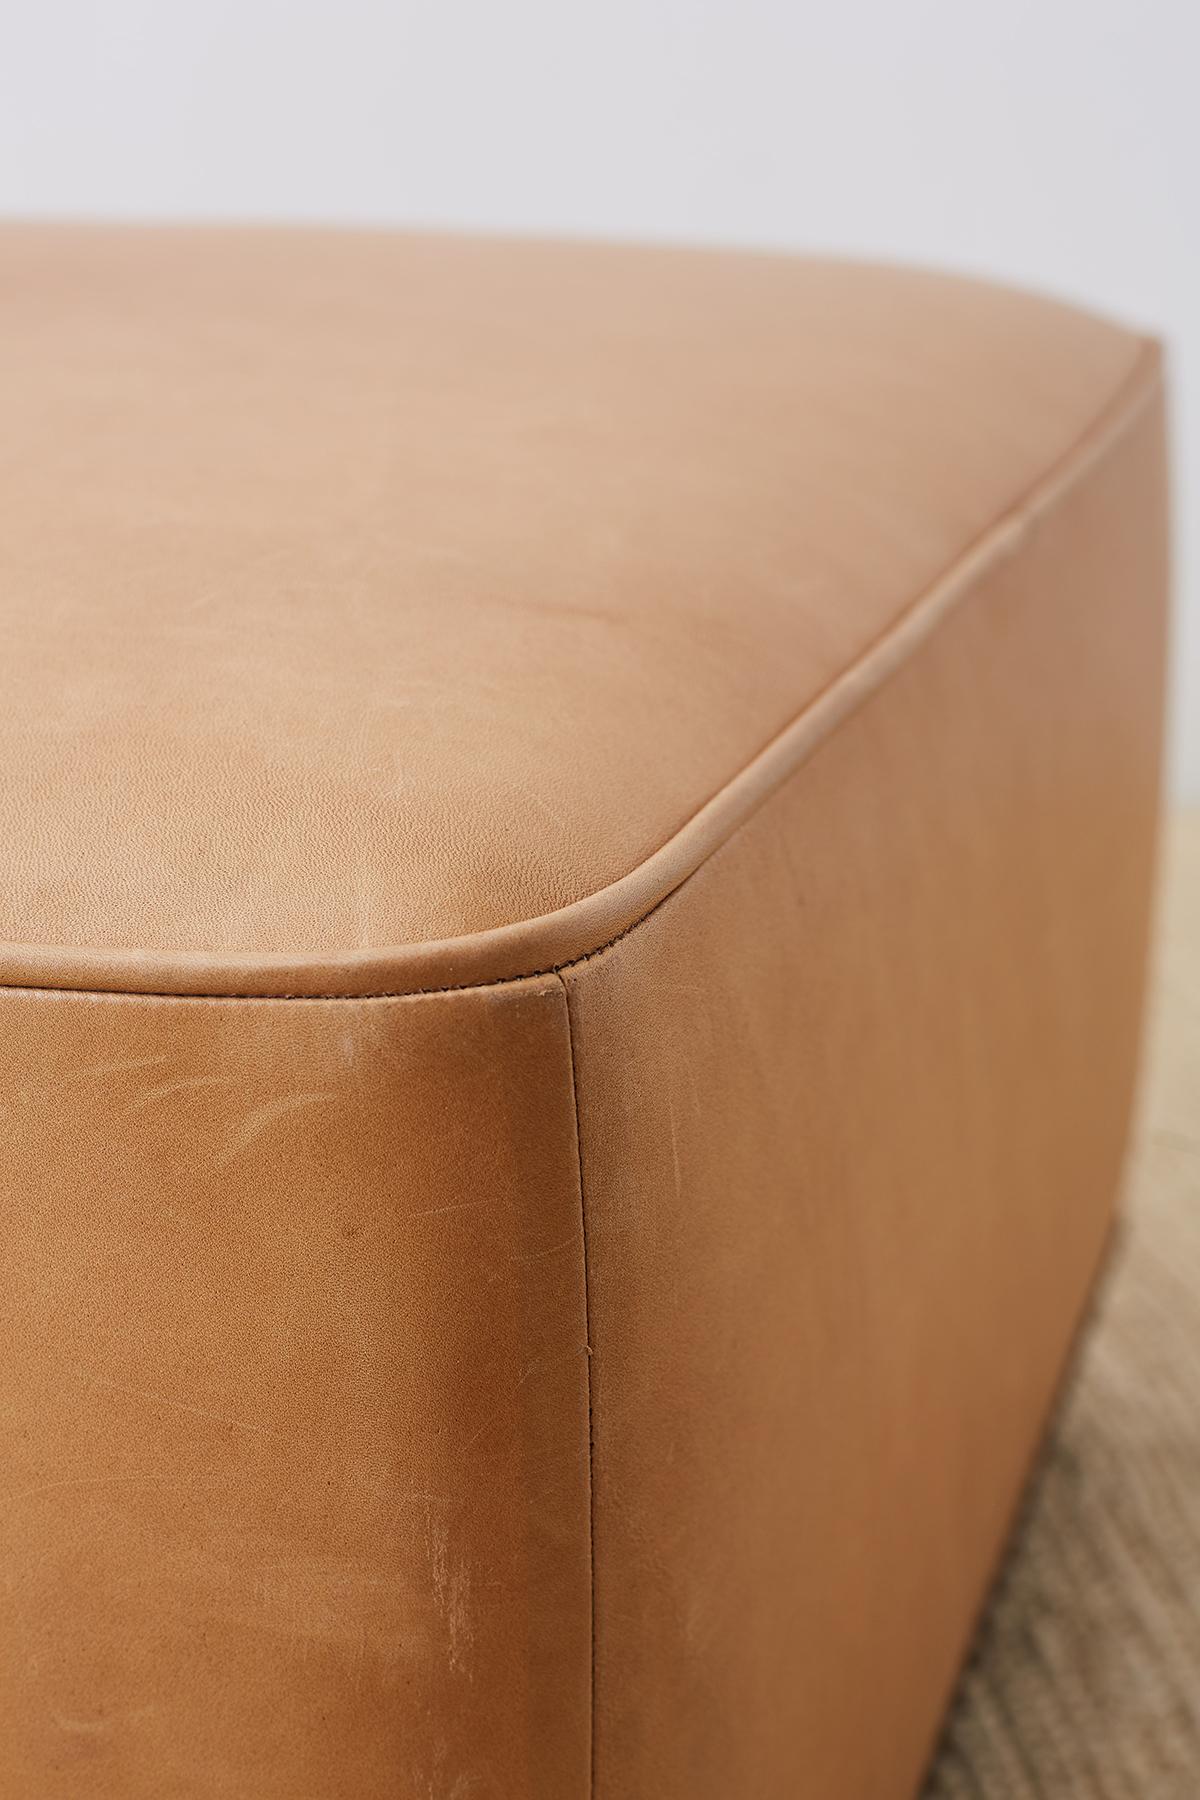 20th Century Contemporary Leather Covered Ottoman or Bench